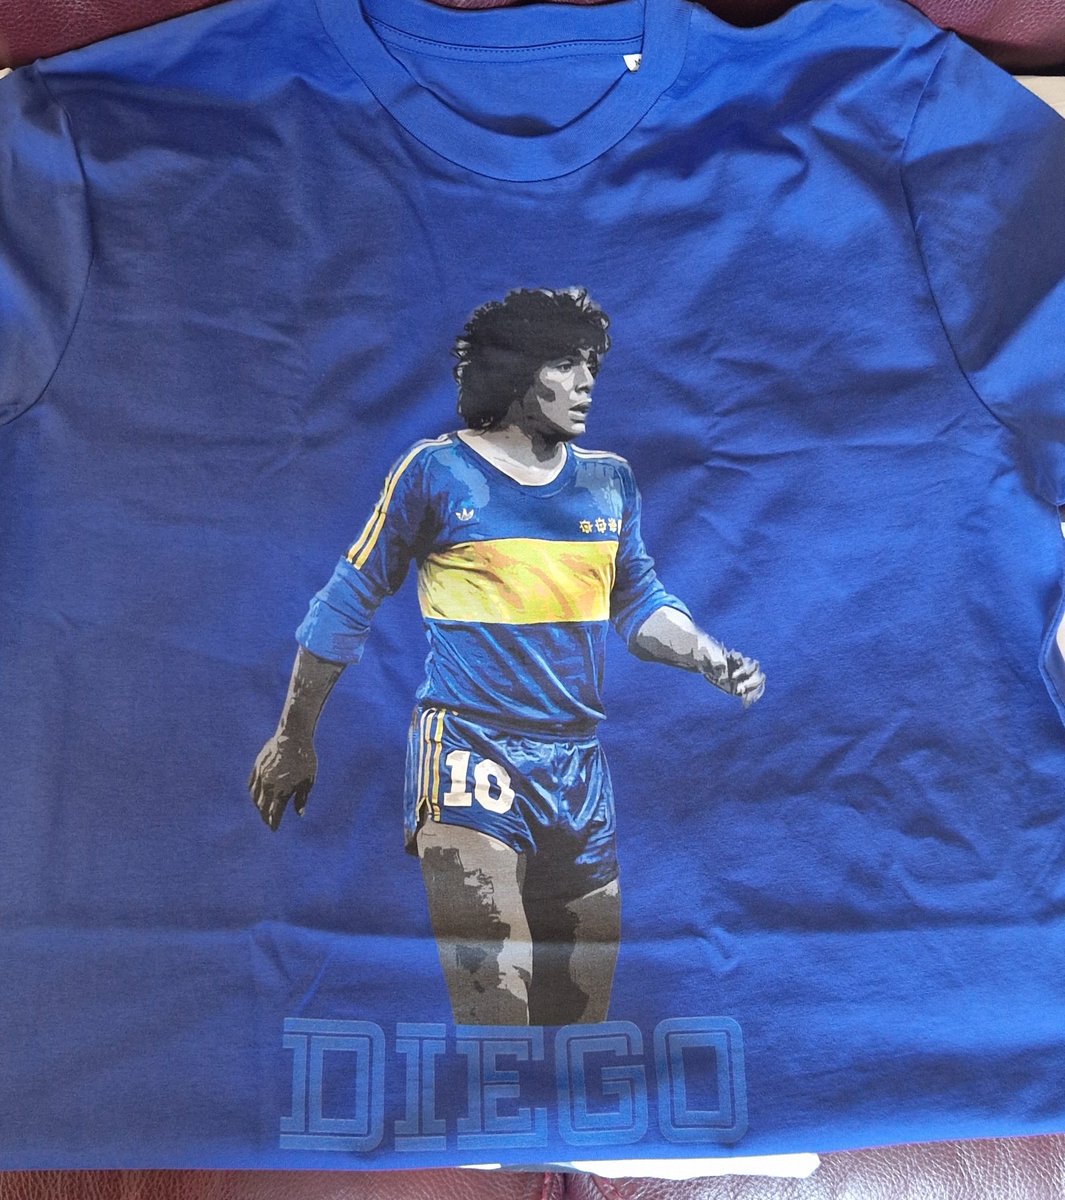 Diego Tshirts available to order this weekend. Contact me via DM for more details 🐐